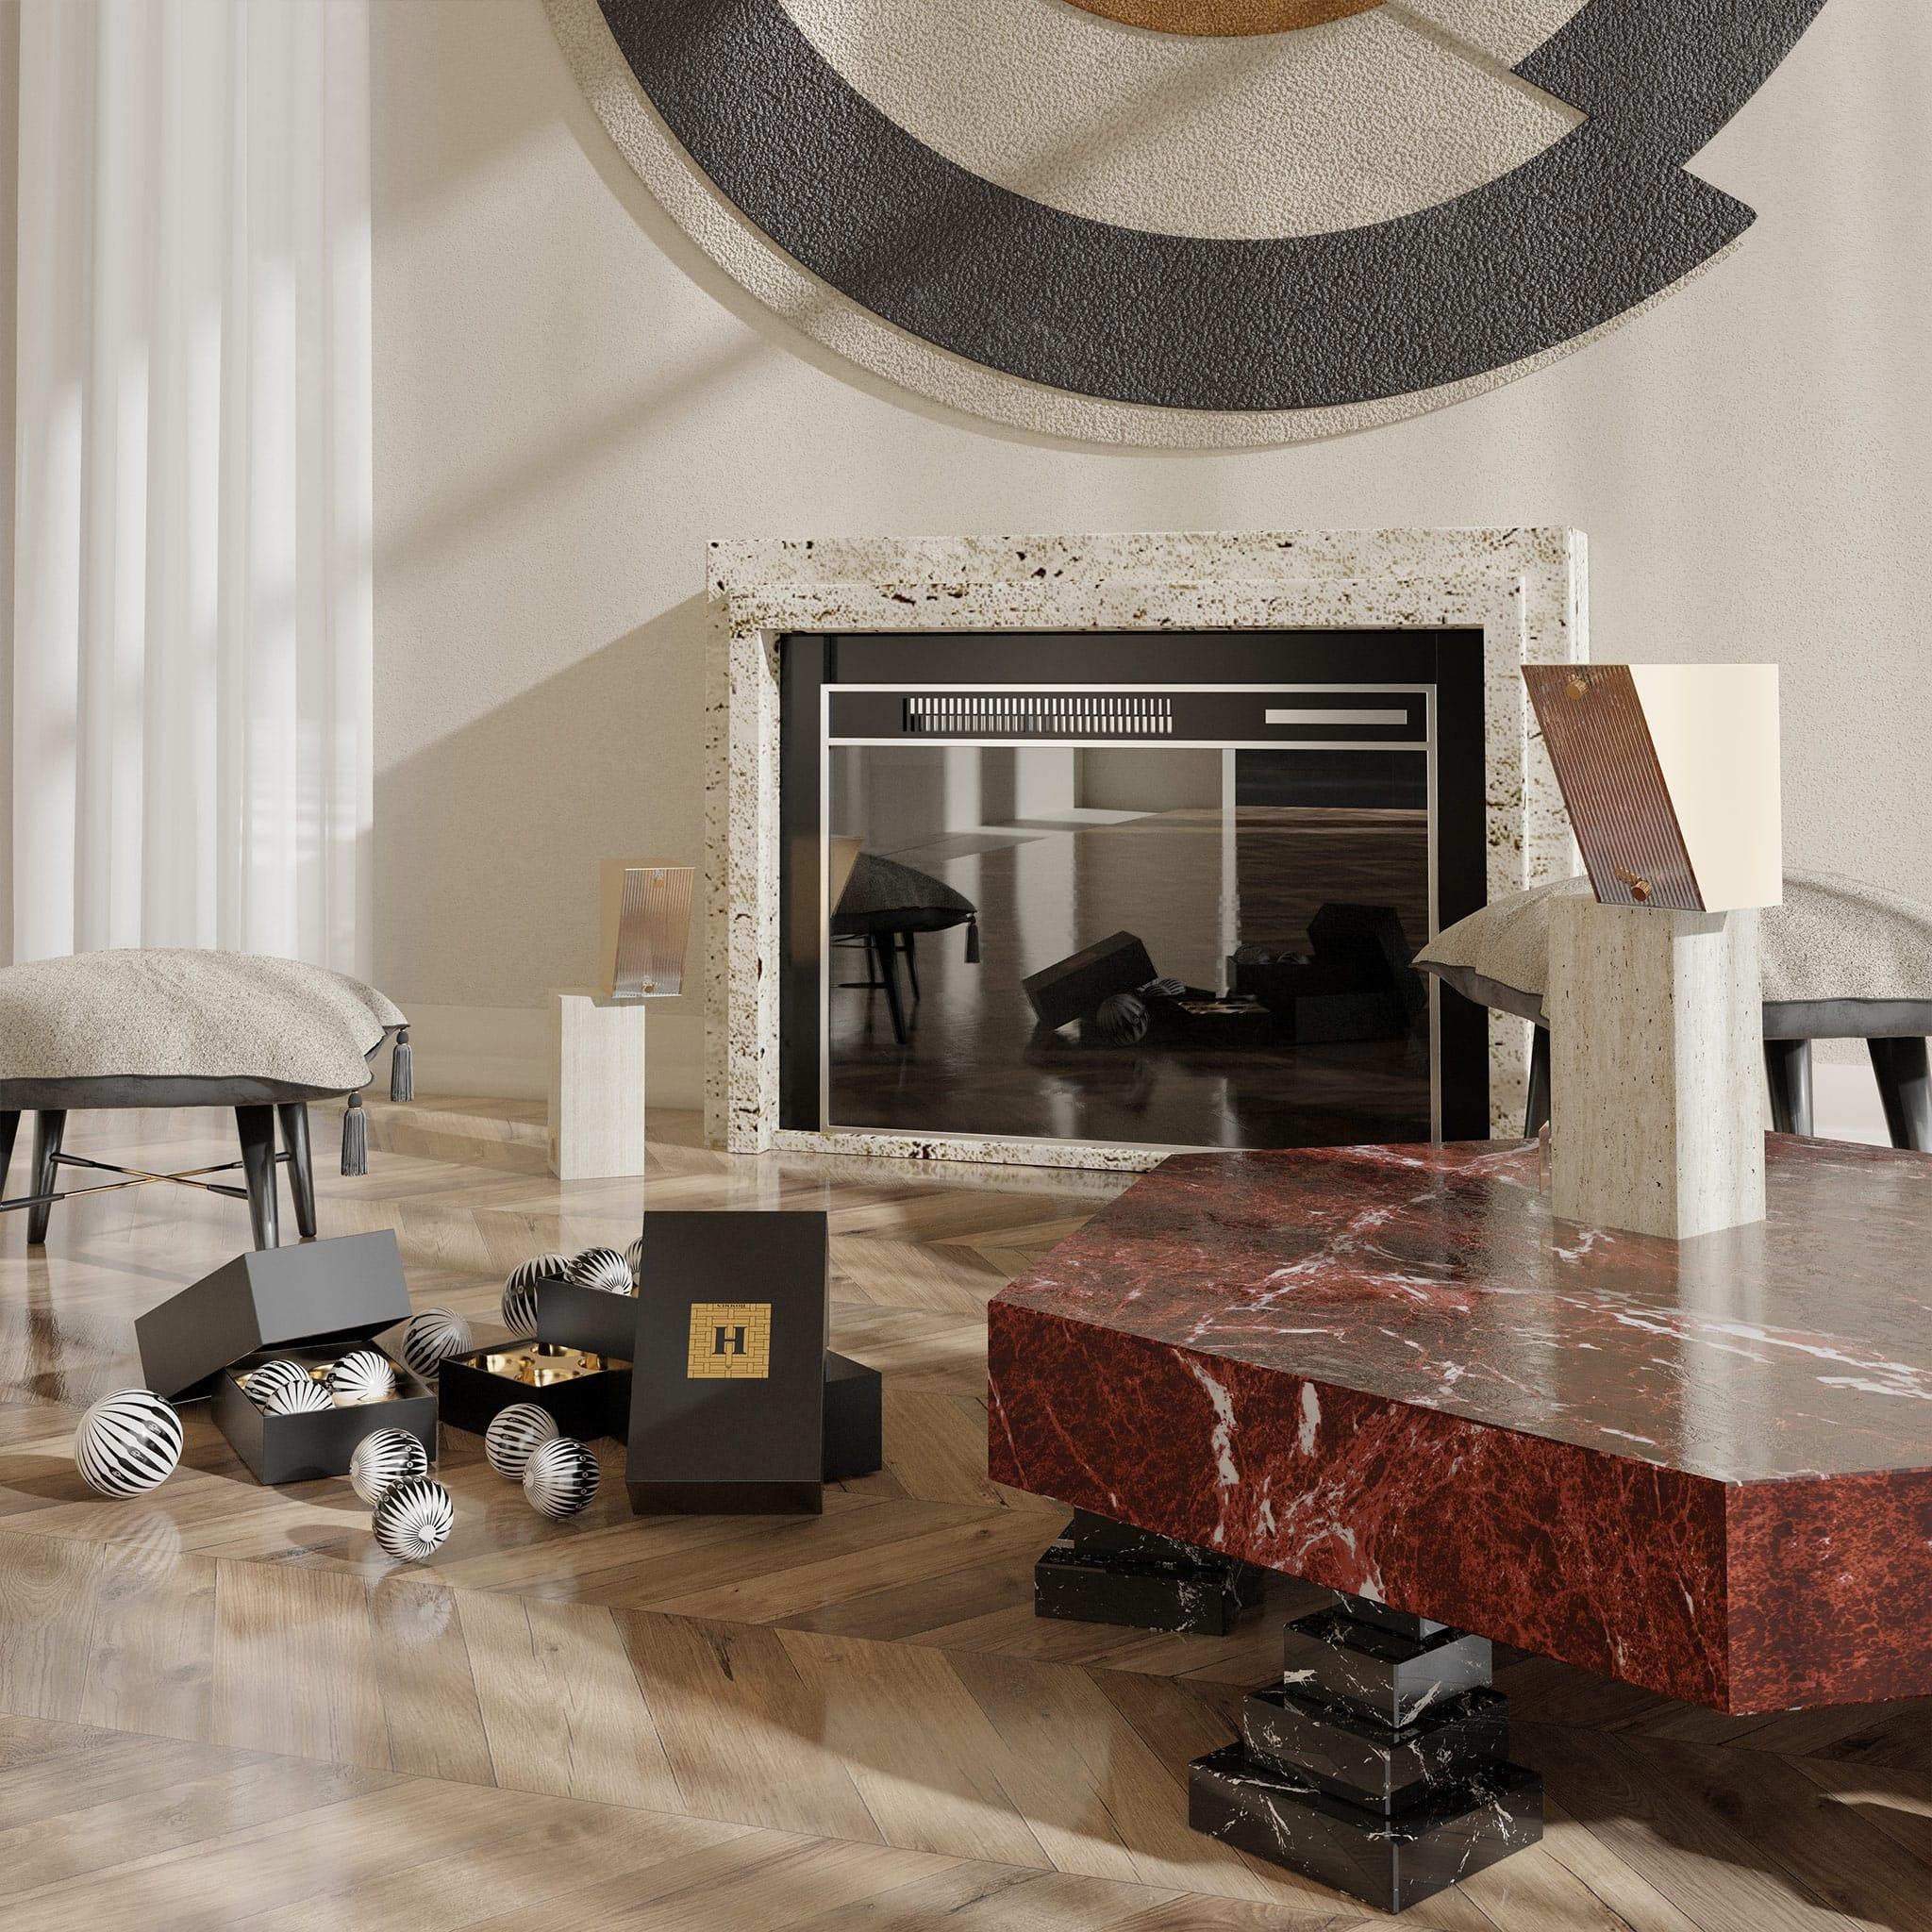 Contemporary Geometric Center Table in Red Levanto Marble & Nero Marquina Marble
Odonto Center Table is a modern coffee table that is an excellent choice for a contemporary luxury design. It was created to re-interpret the hexagonal shapes seen in